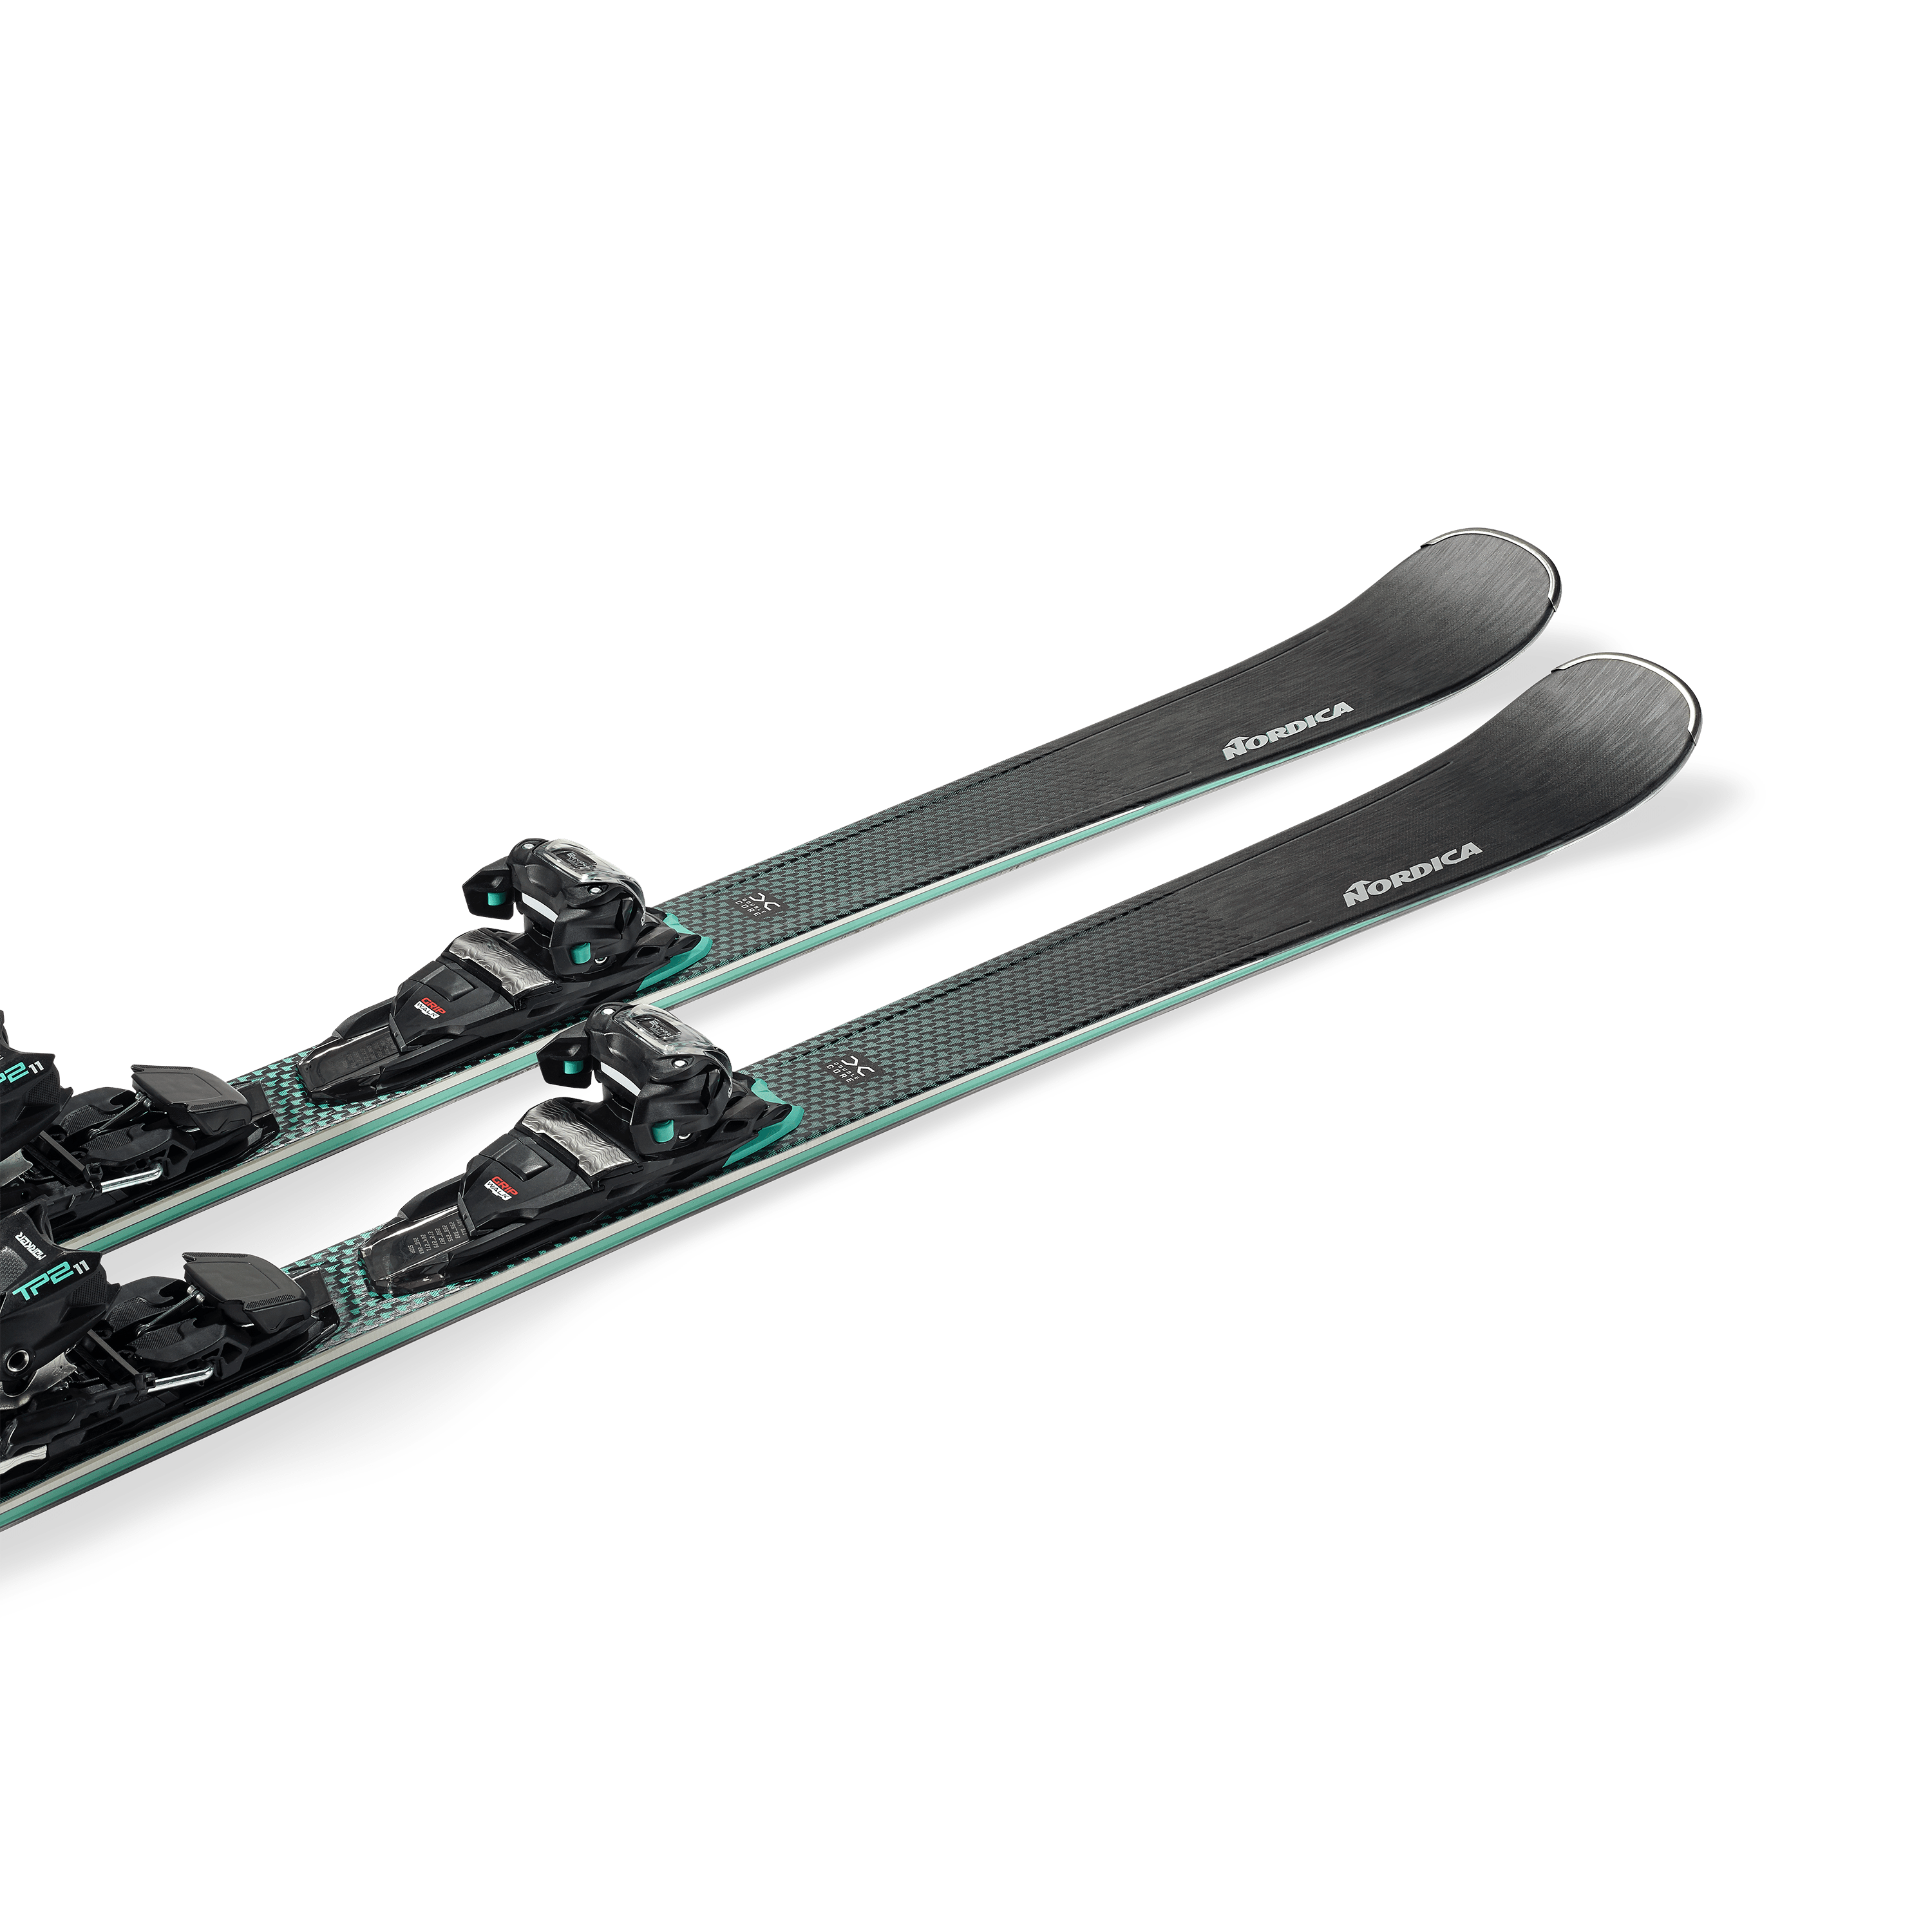 Picture of the Nordica Belle dc 72 skis.